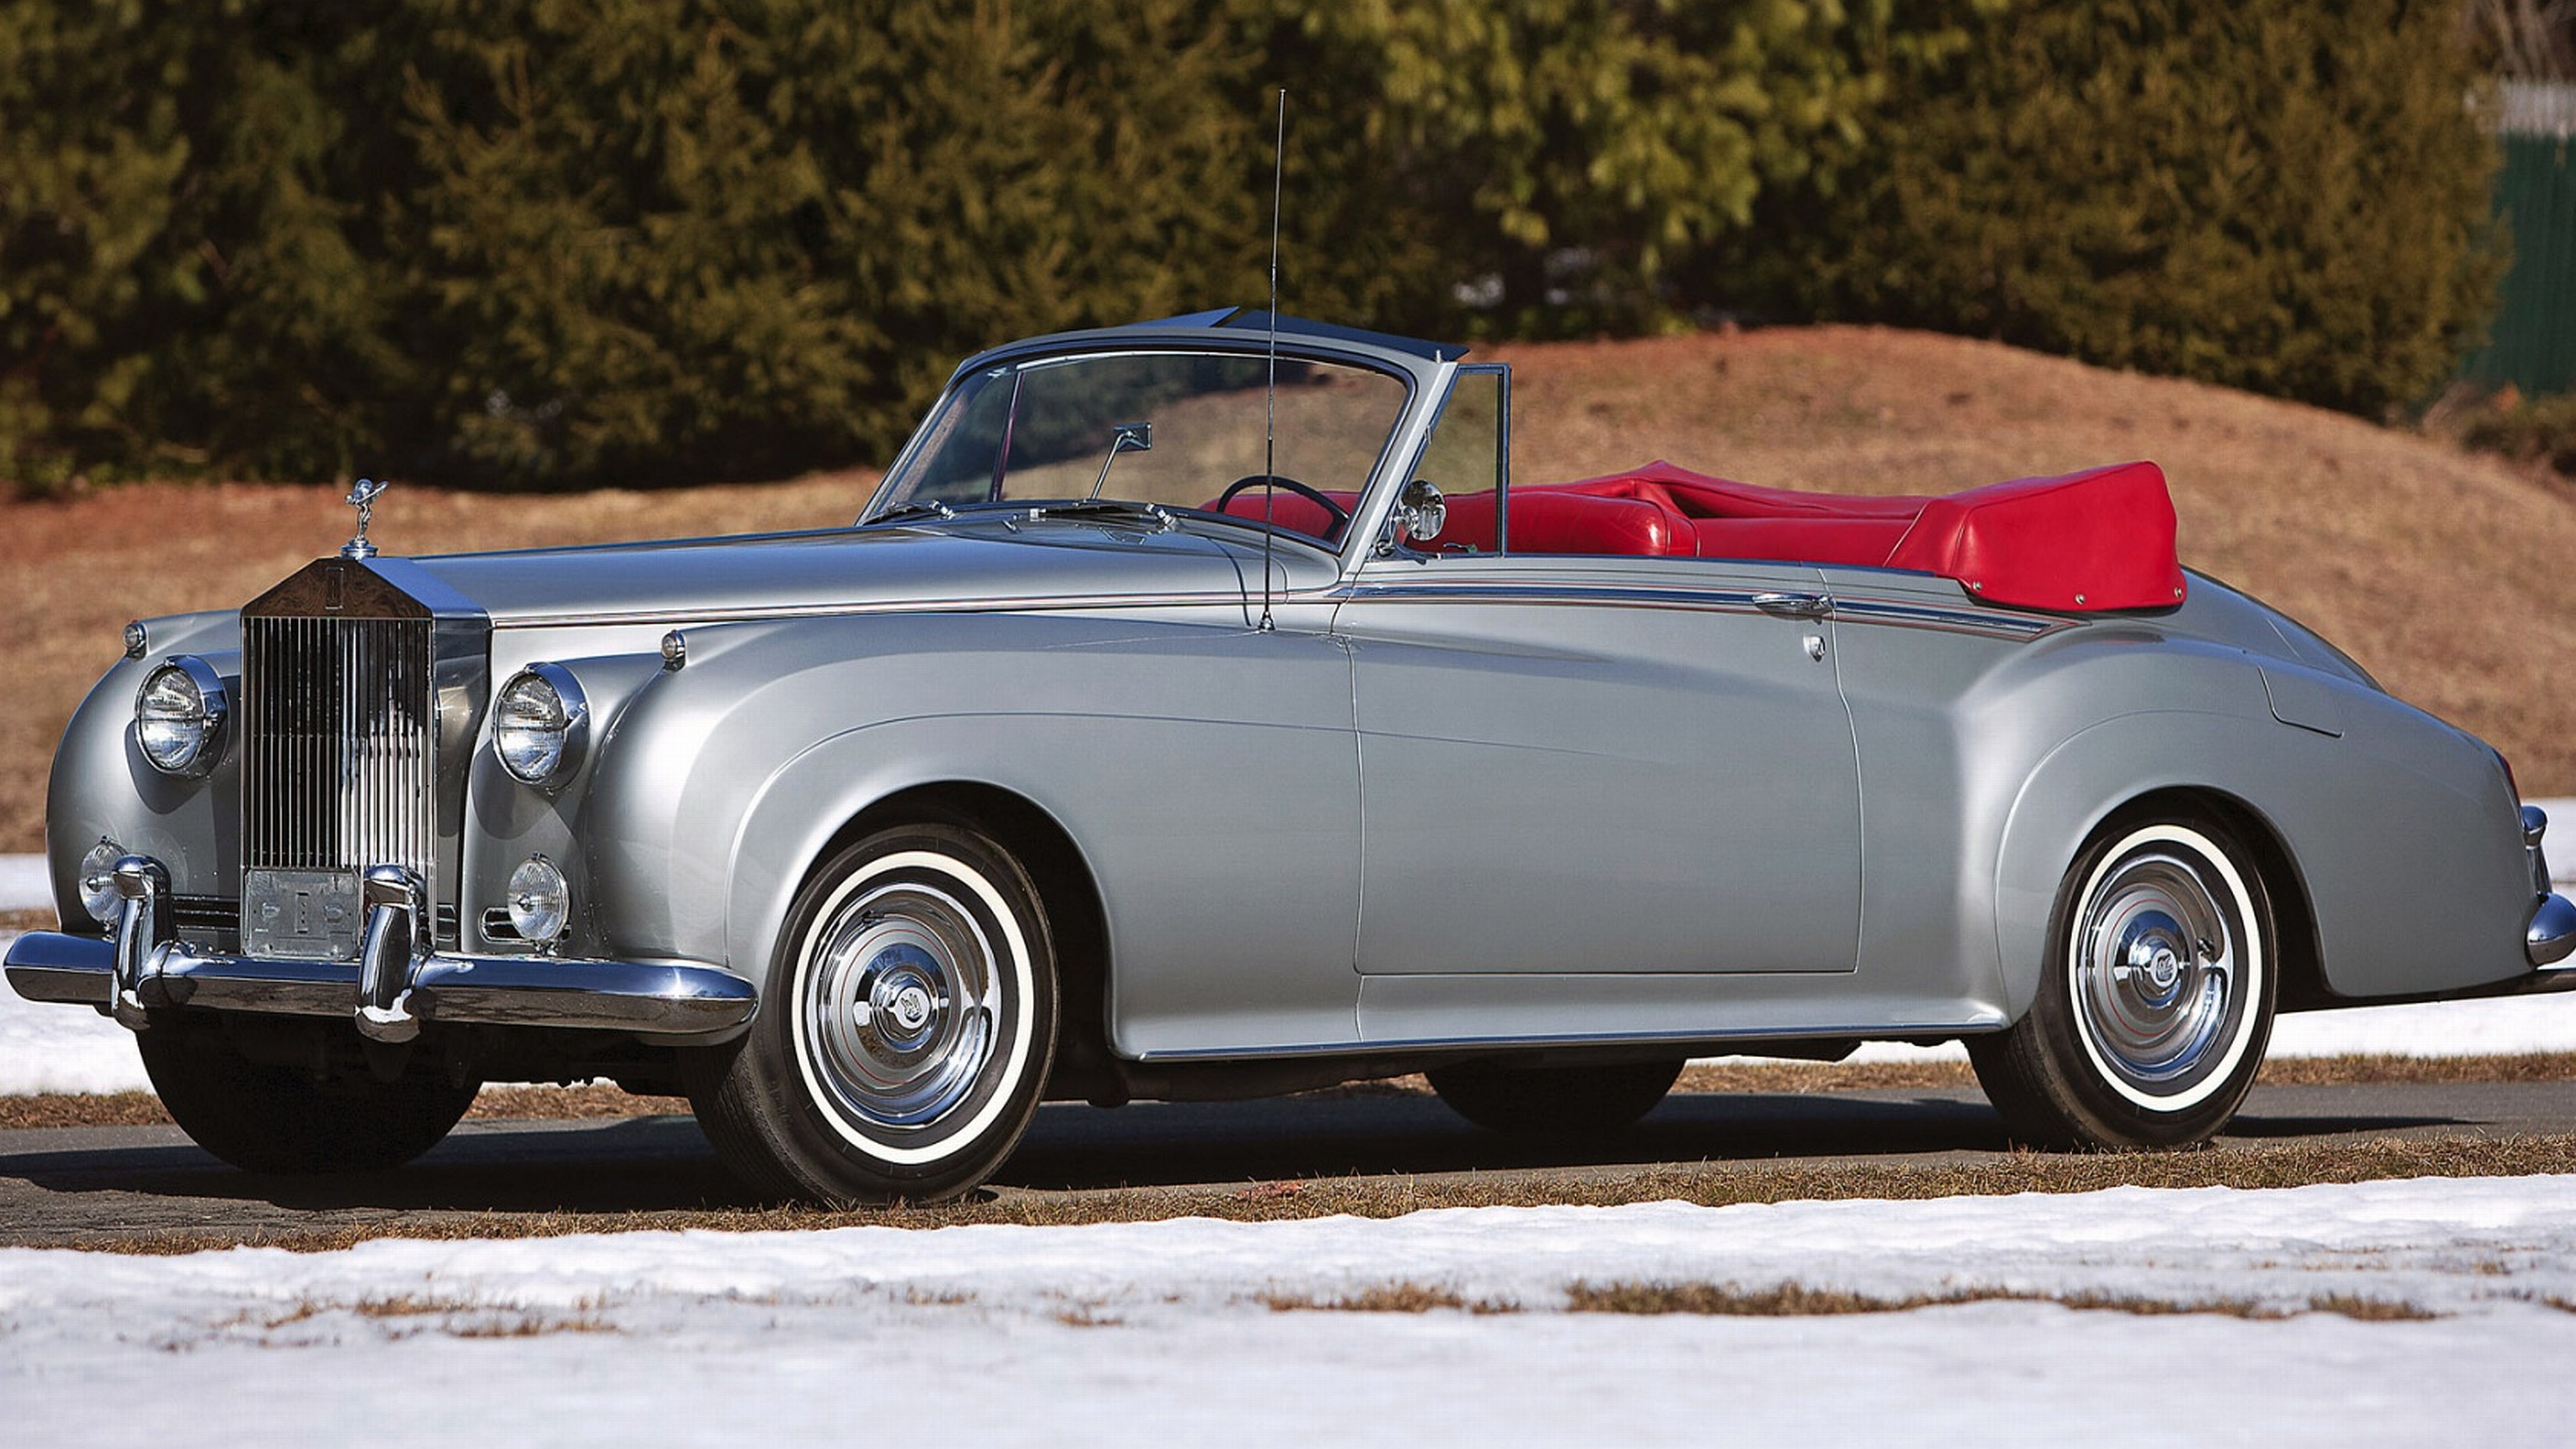 1962 Rolls-Royce Silver Cloud II Drophead Convertible Coupe by H.J. Mulliner